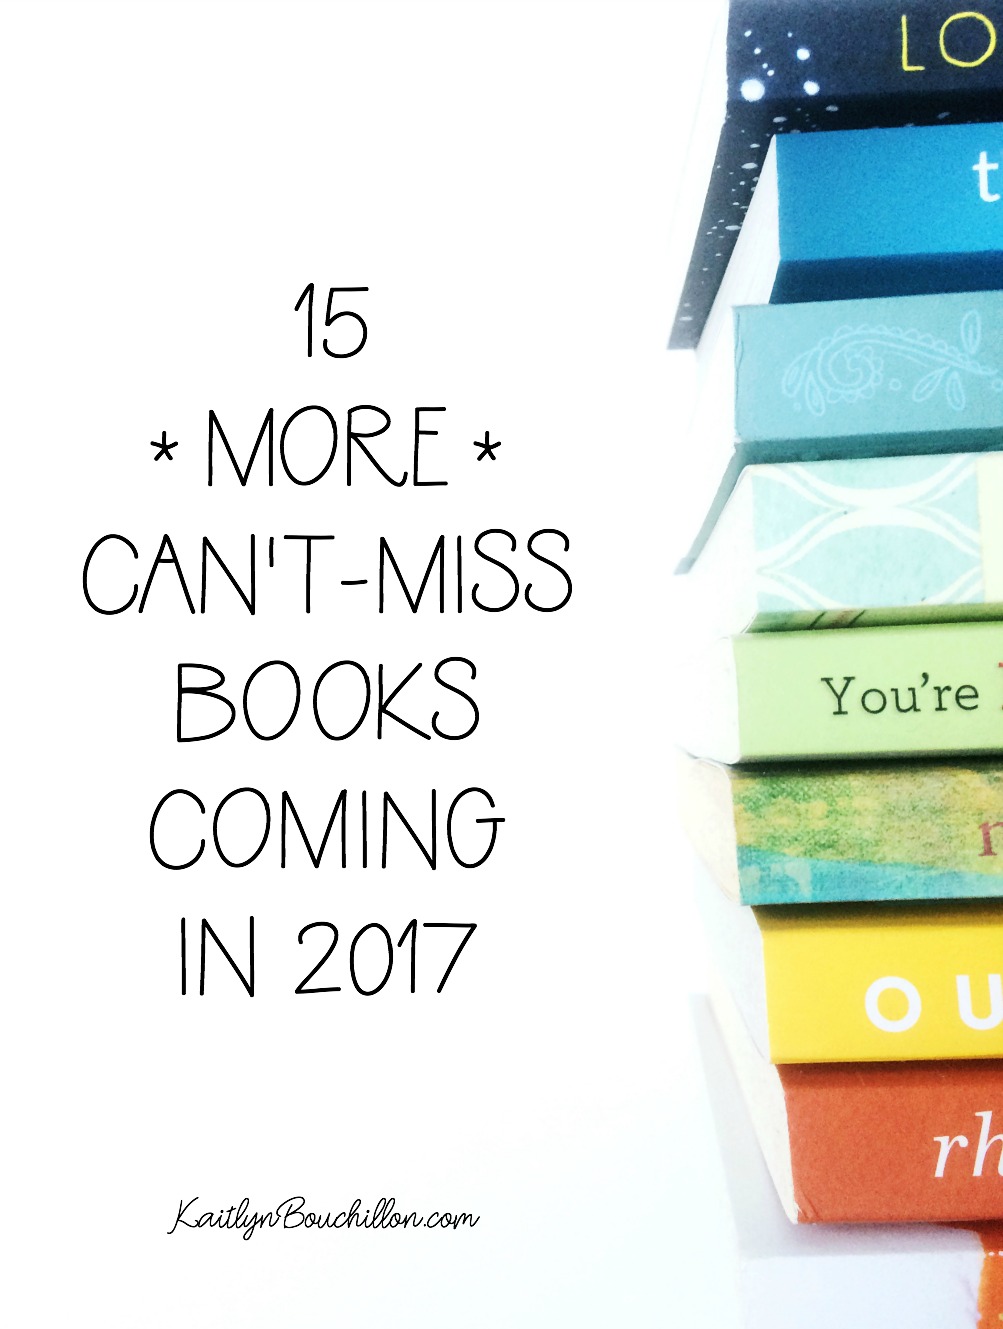 This list is amazing! 15 can't-miss books coming out in 2017... Ann Voskamp, Melanie Shankle, Holley Gerth, Anne Bogel and many more!